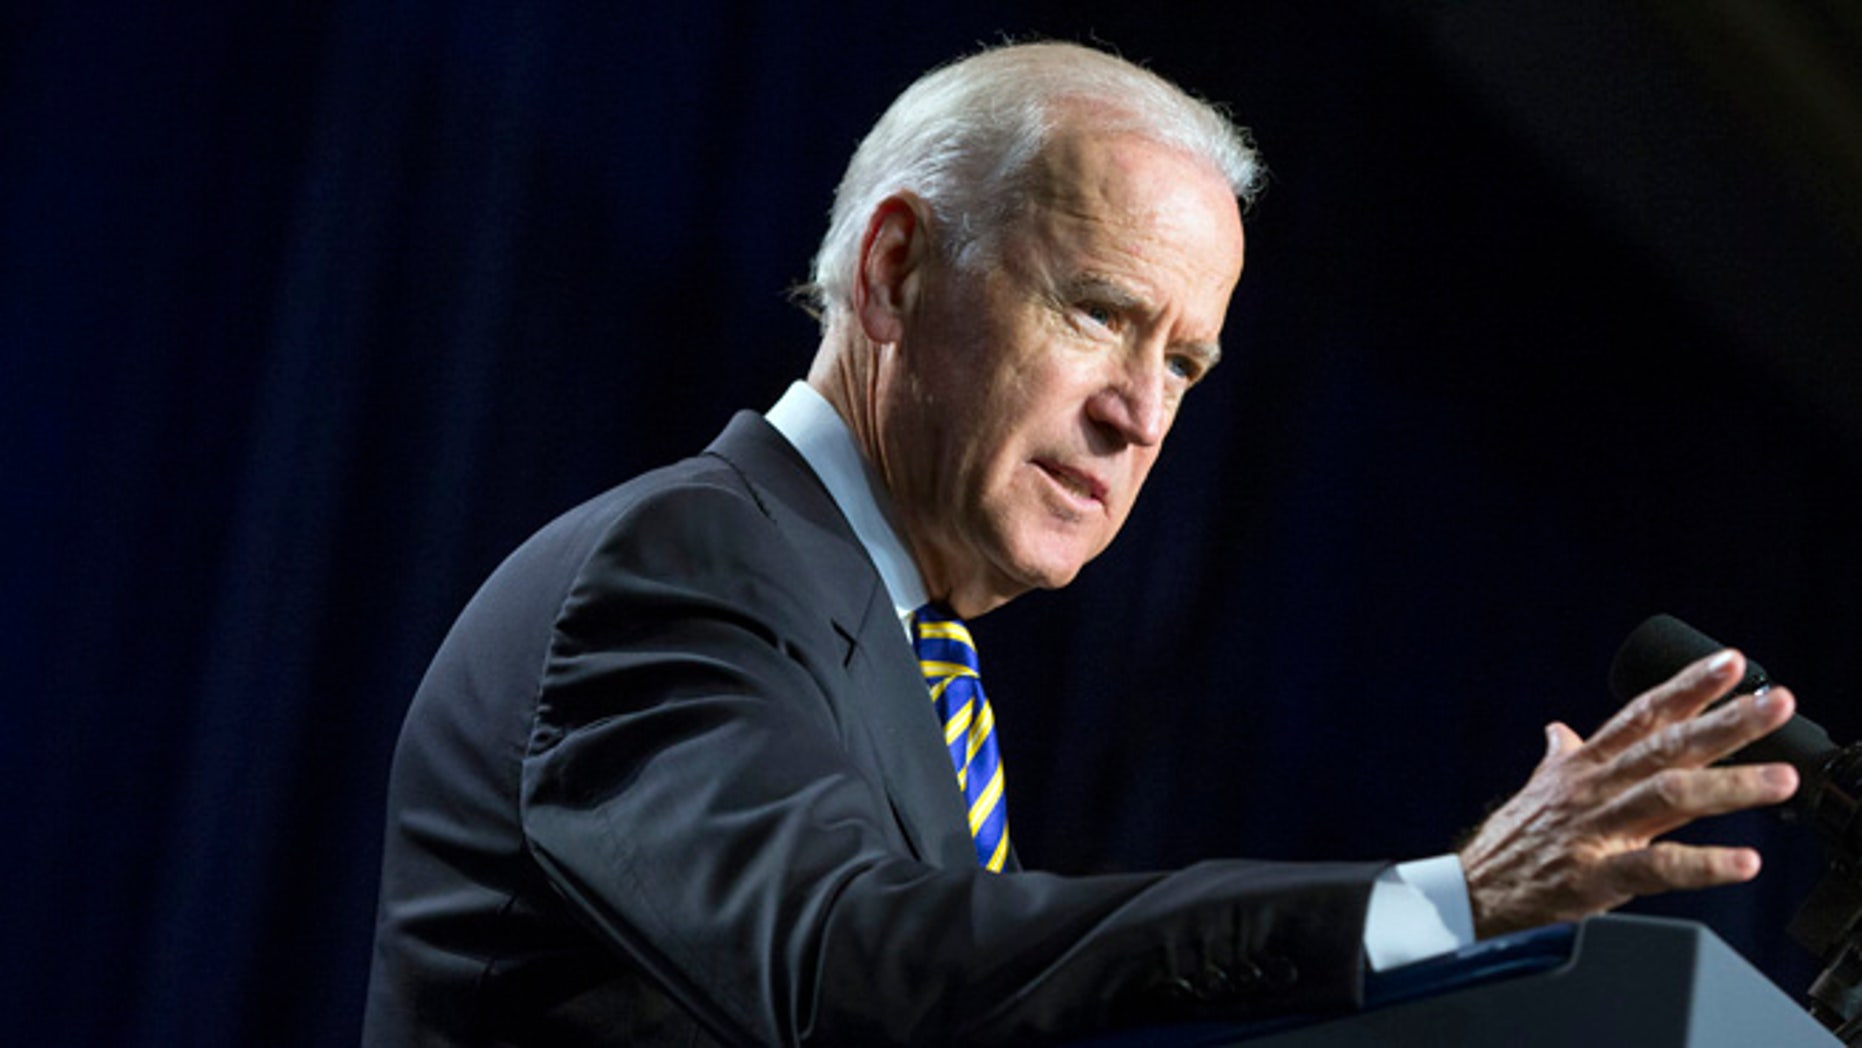 Vice President Biden Stumps For California Latino Candidates And Touts Benefits Of Immigration 4216